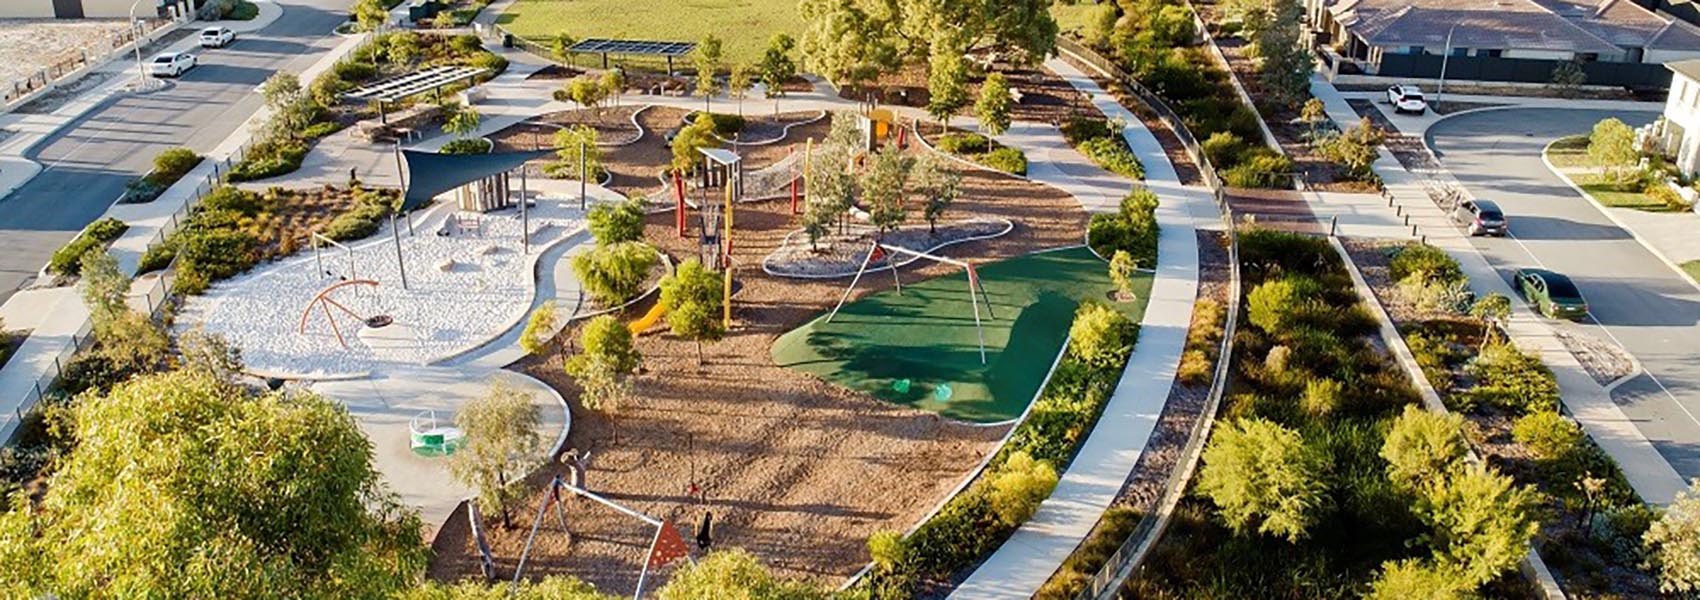 Best Parks and Playgrounds in Perth's Northern Suburbs | Move Homes